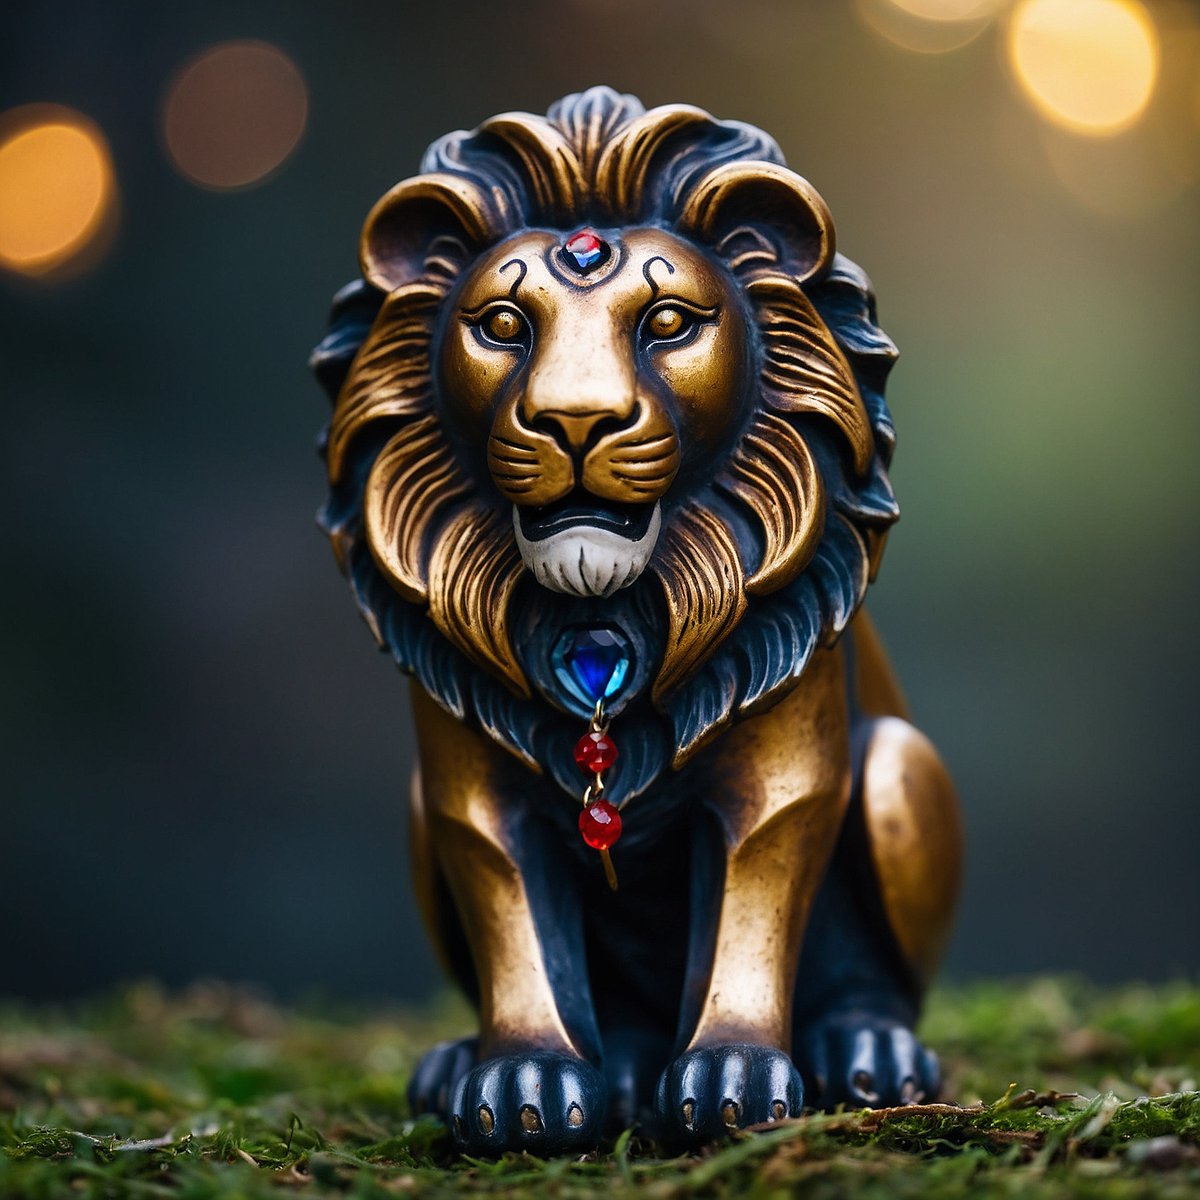 Congratulation to our Legendary Pass holder @HatenCRO on being selected for the latest edition of Lion in Limelight 🎊 Well deserved and earned 💪 A @LoadedLions_CDC and @cryptocomnft Legend who also chose to be BRAVE 🦁 Join our discord for more updates: